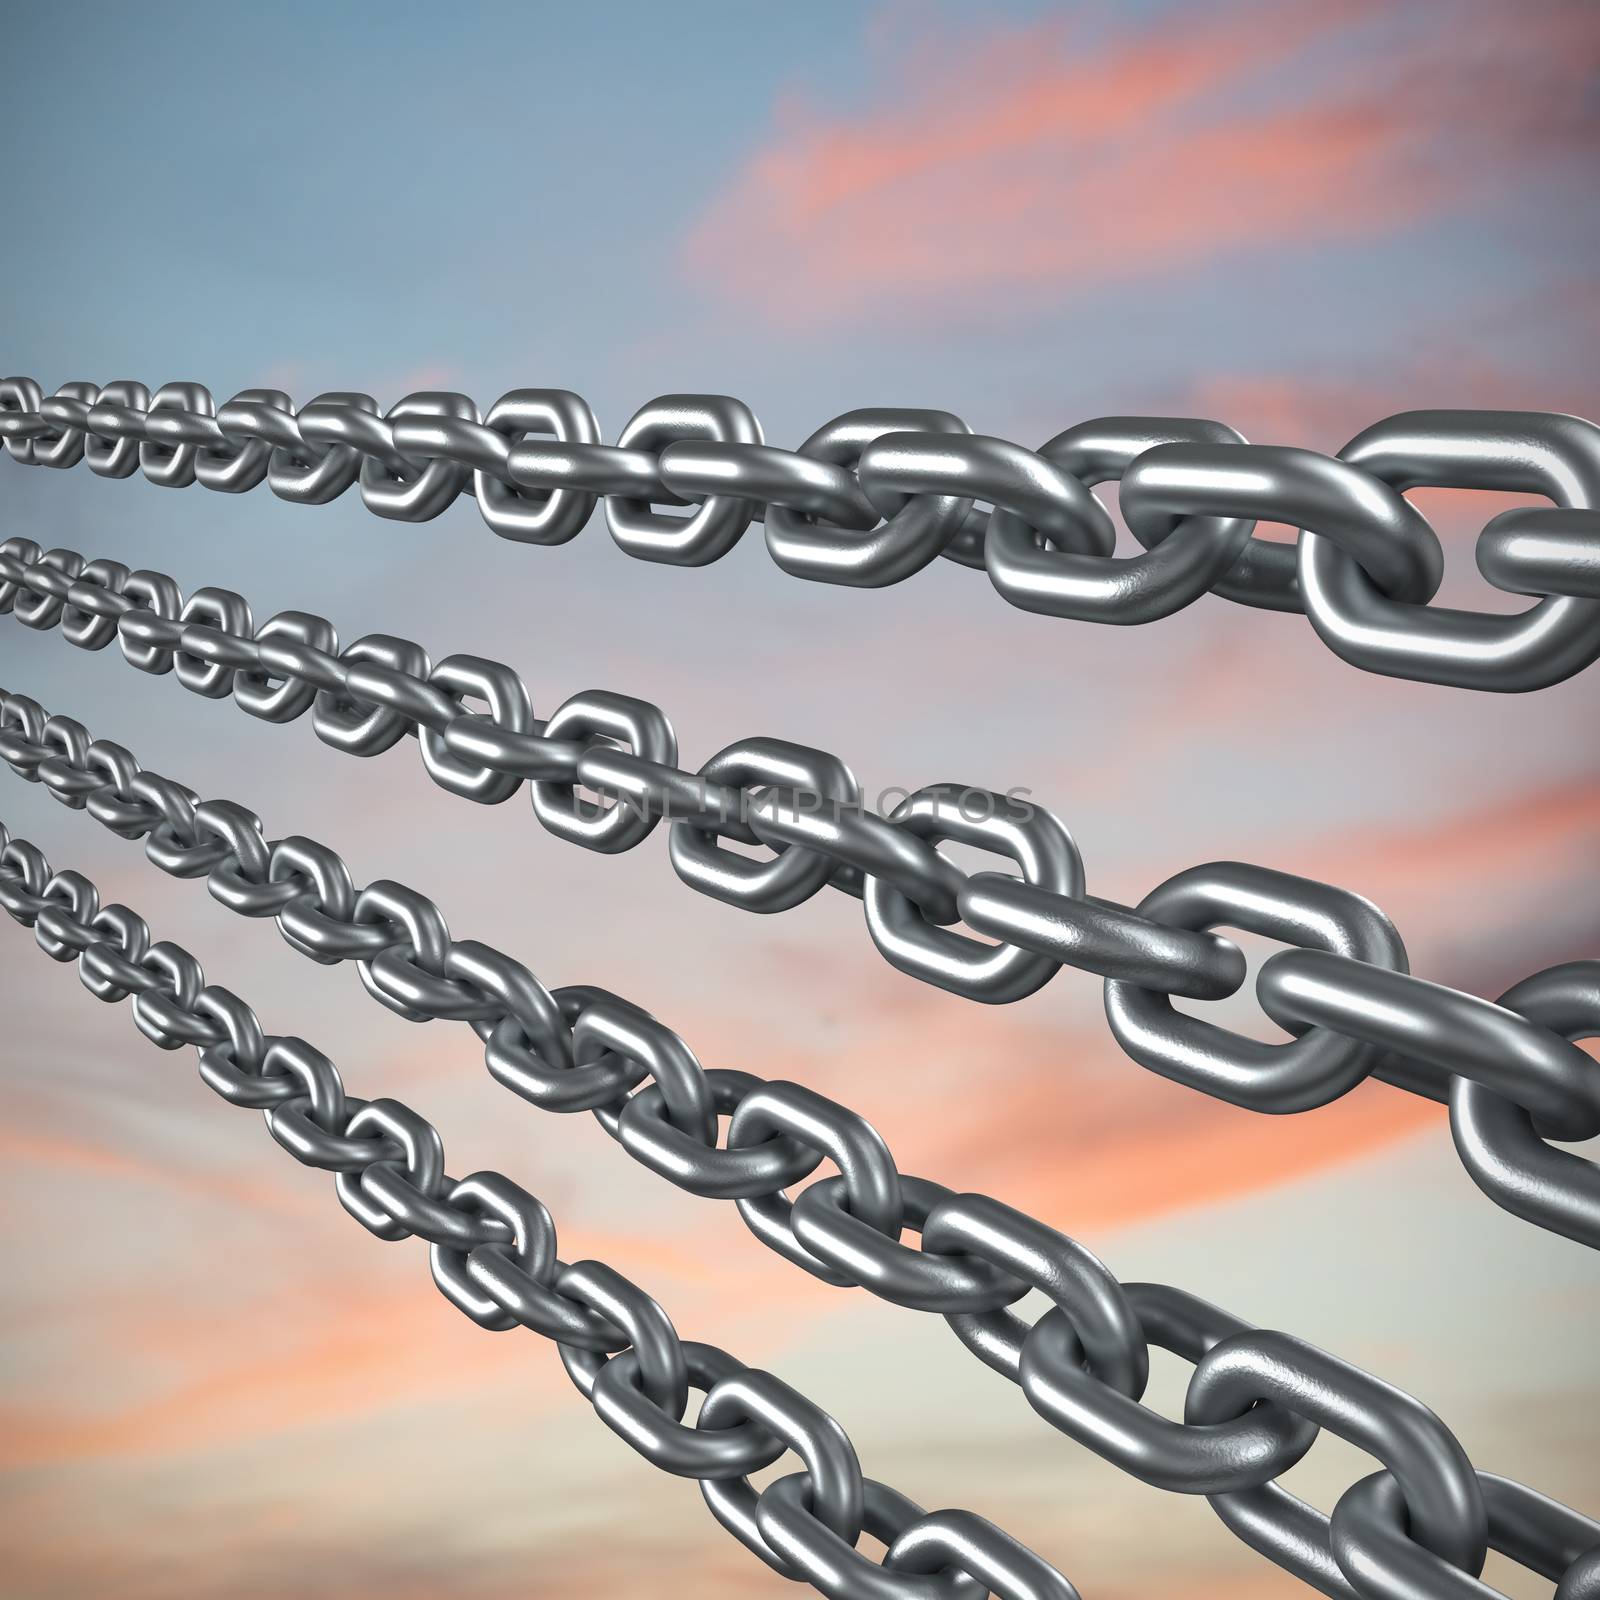 Composite image of 3d image of metal chains  by Wavebreakmedia